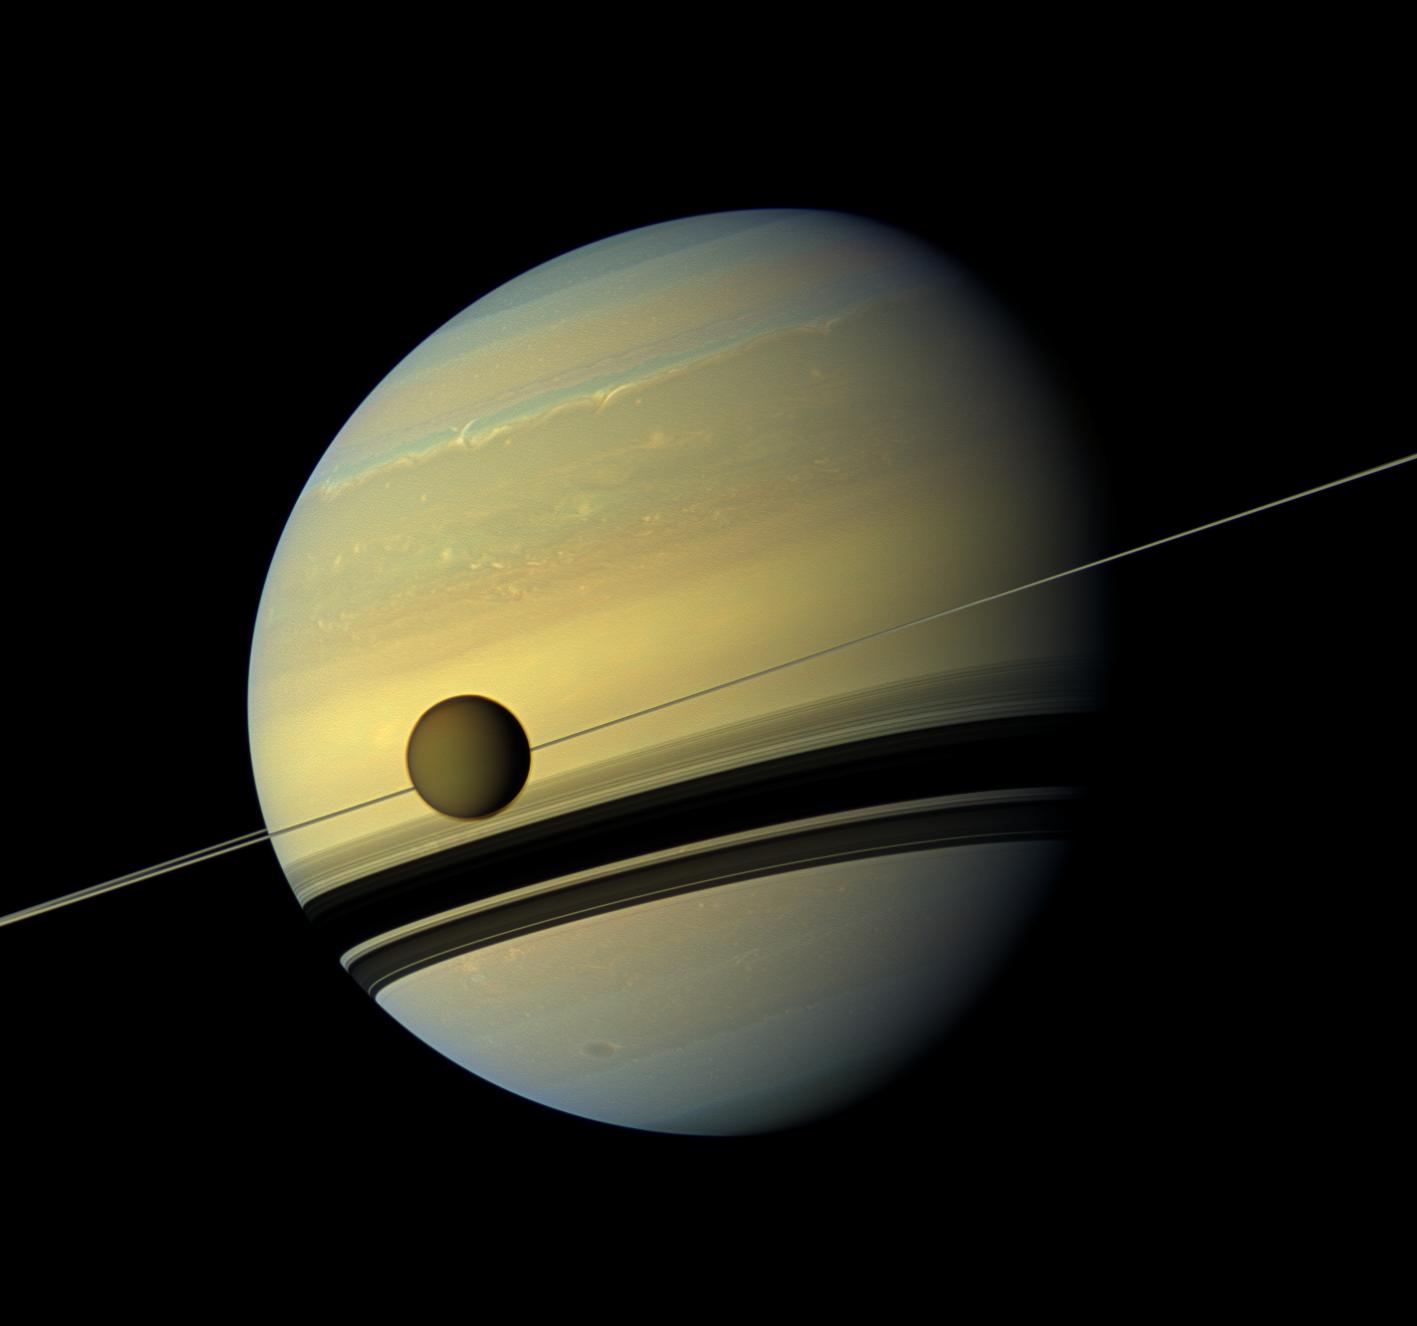 A giant of a moon appears before a giant of a planet undergoing seasonal changes in this natural color view of Titan and Saturn from NASA's Cassini spacecraft.